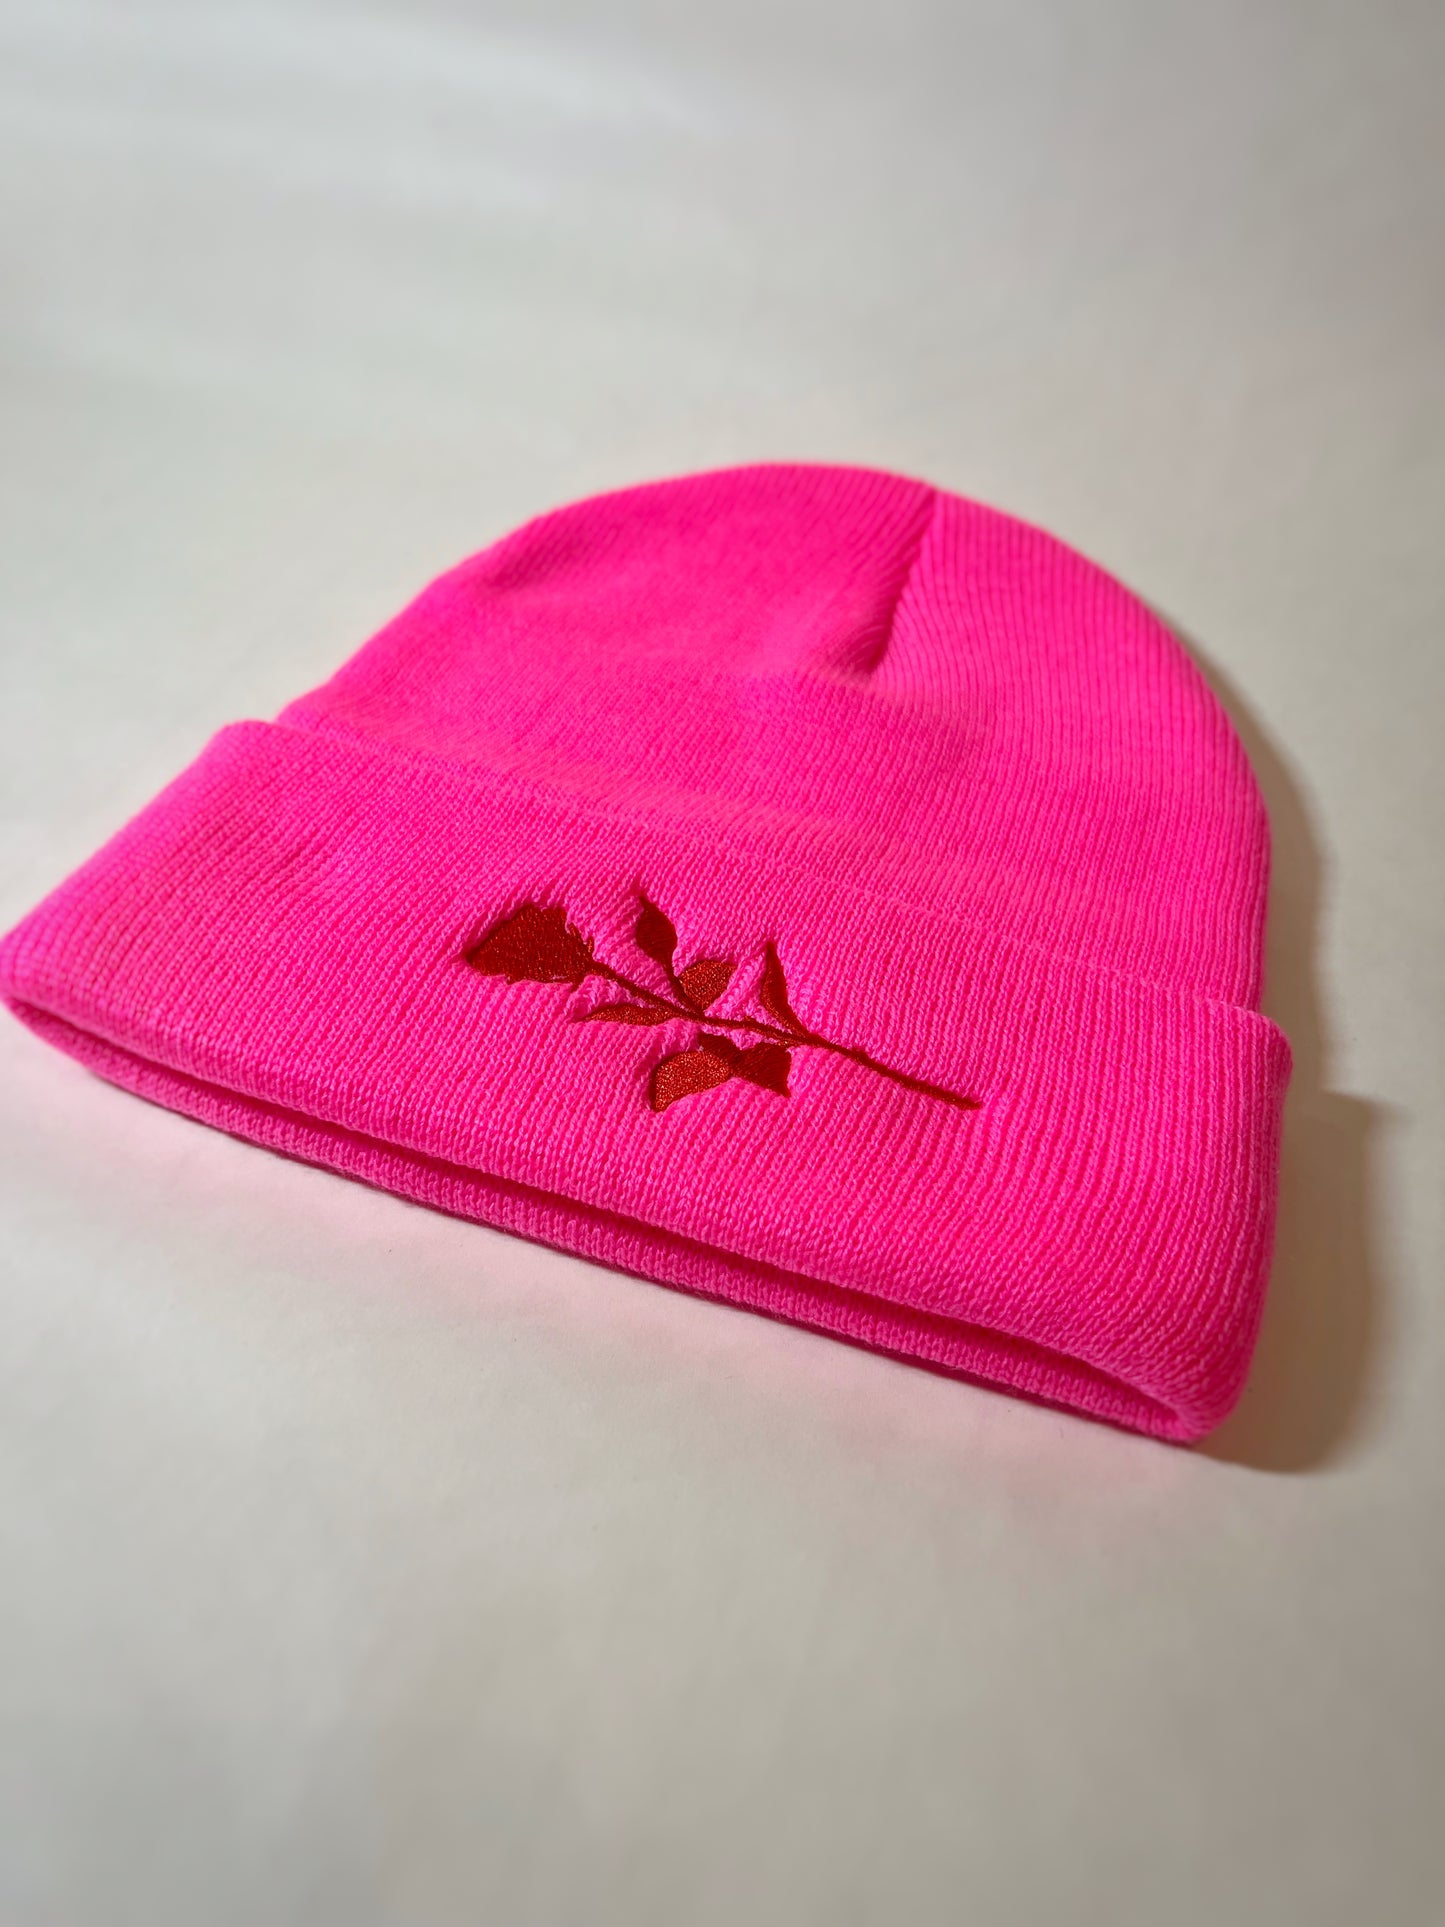 rose silhouette embroidered toque